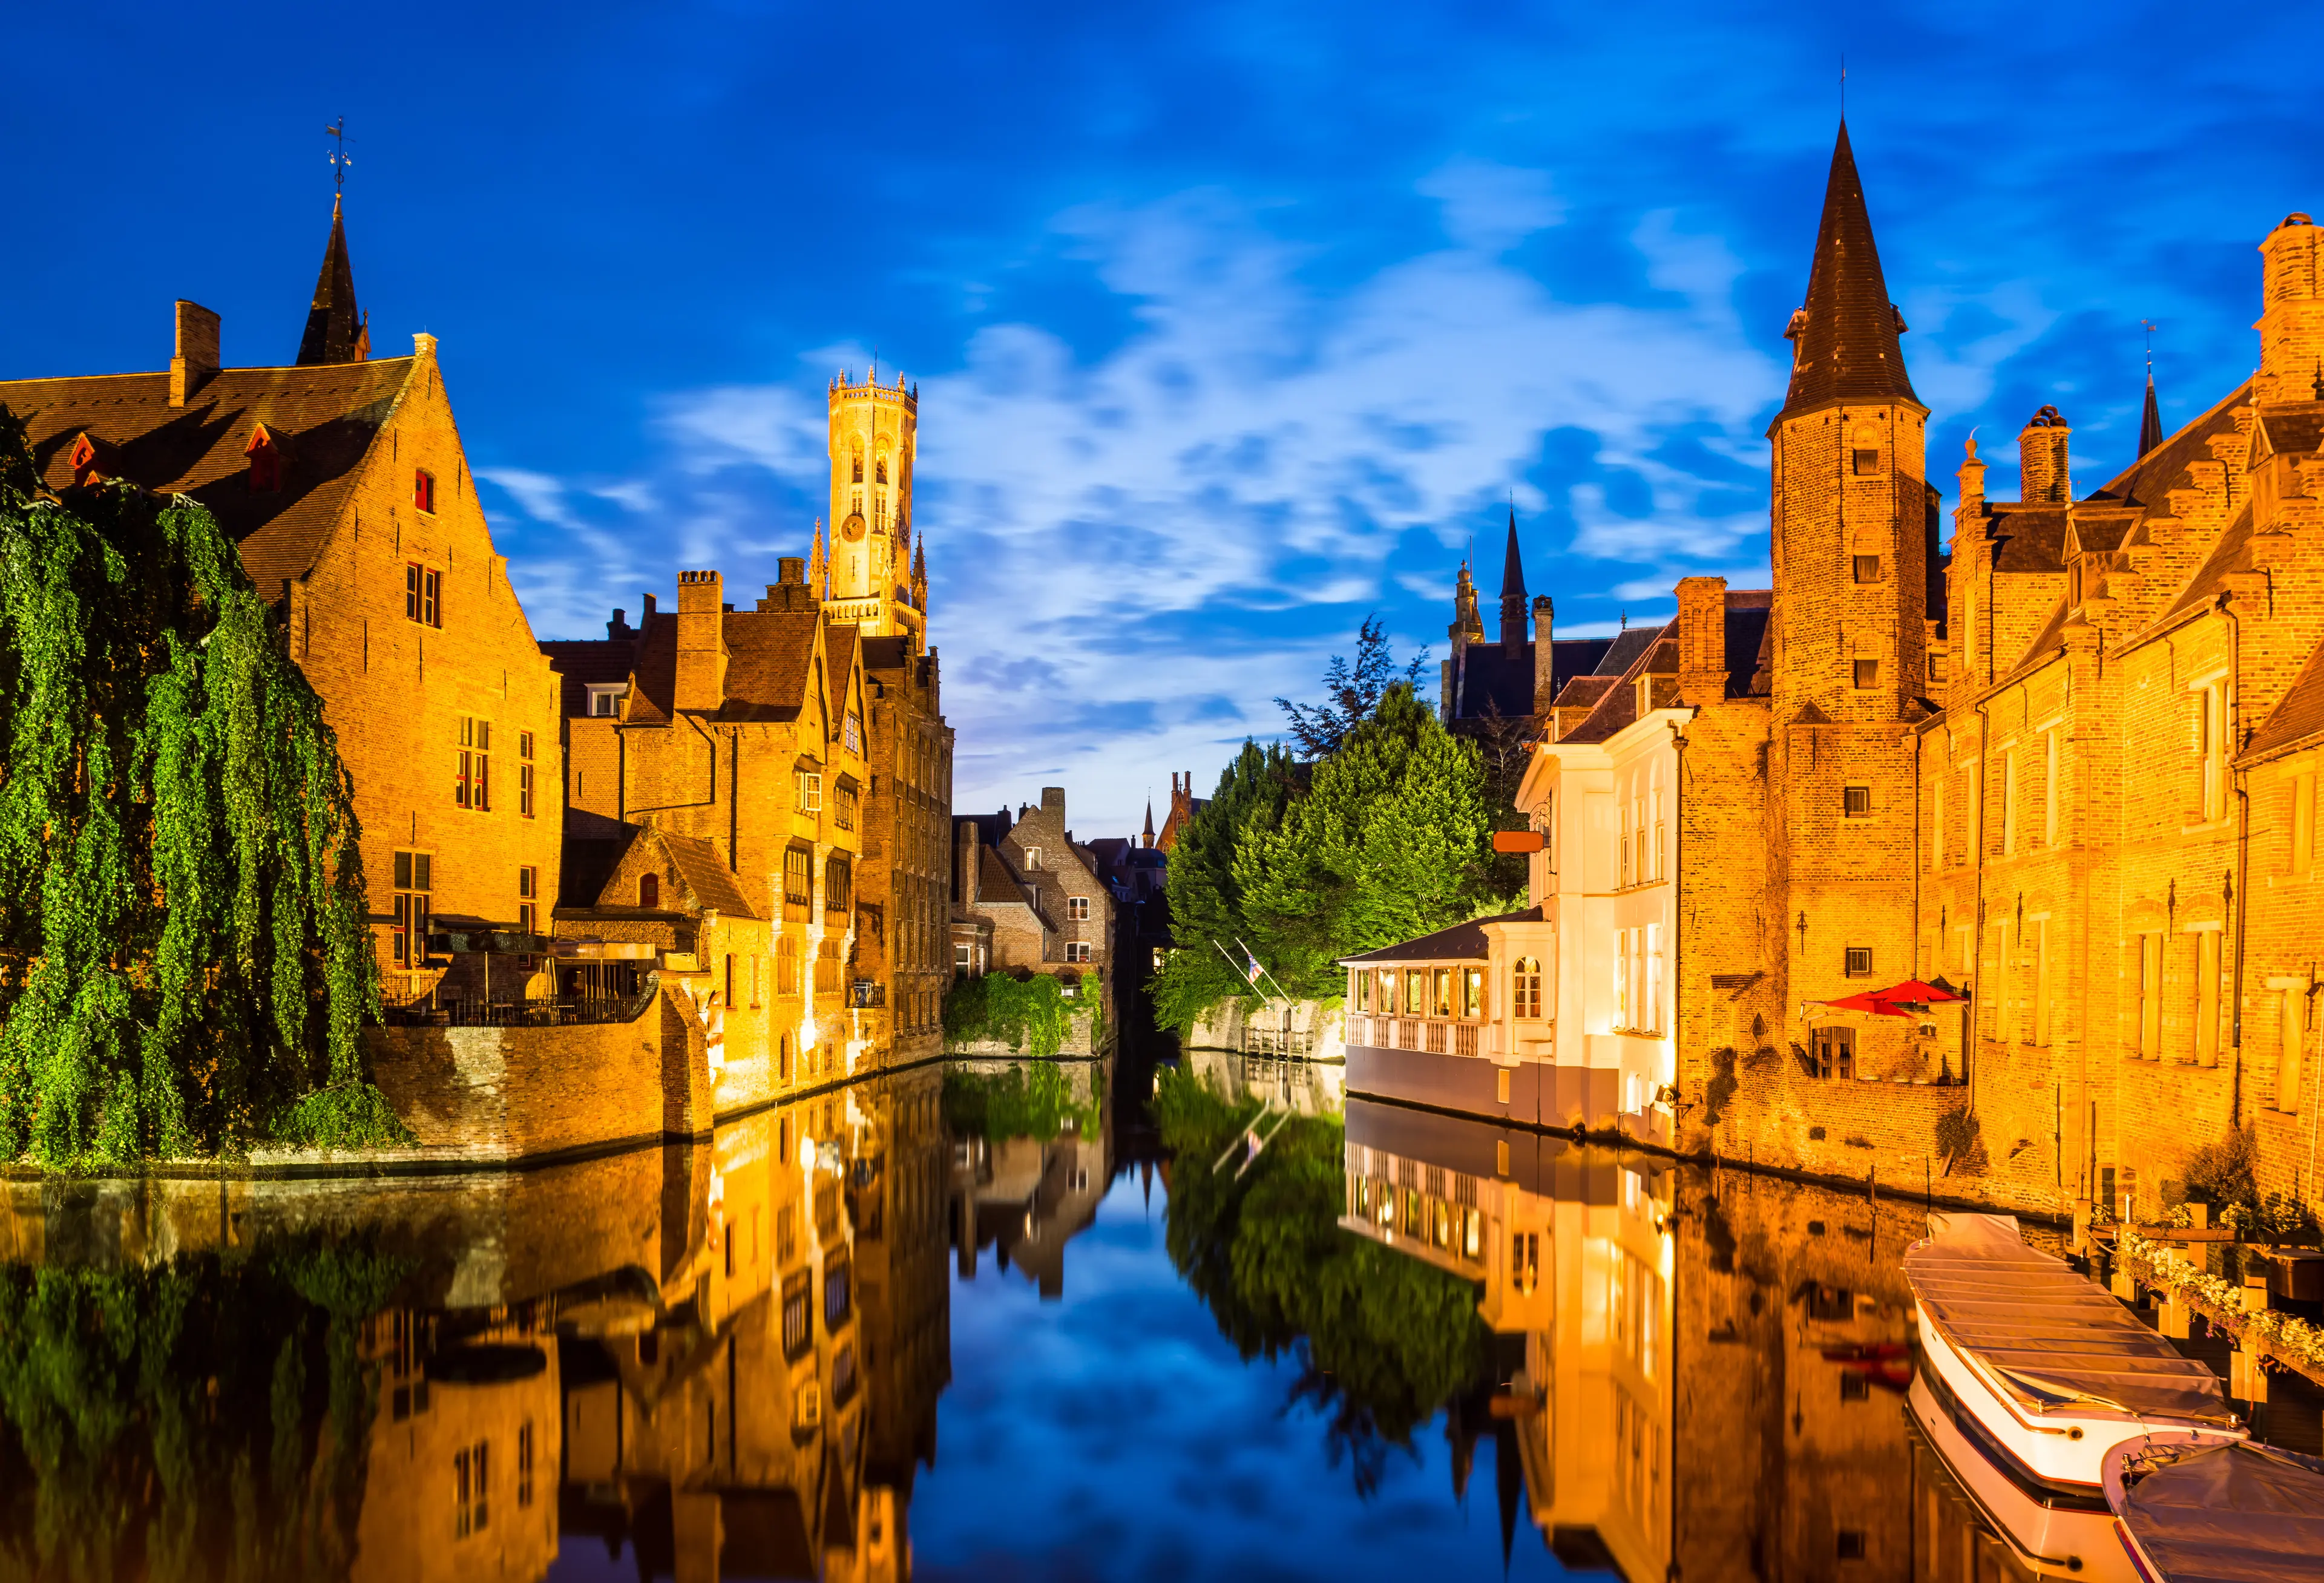 2-Day Sightseeing, Adventure and Nightlife Itinerary in Bruges, Belgium